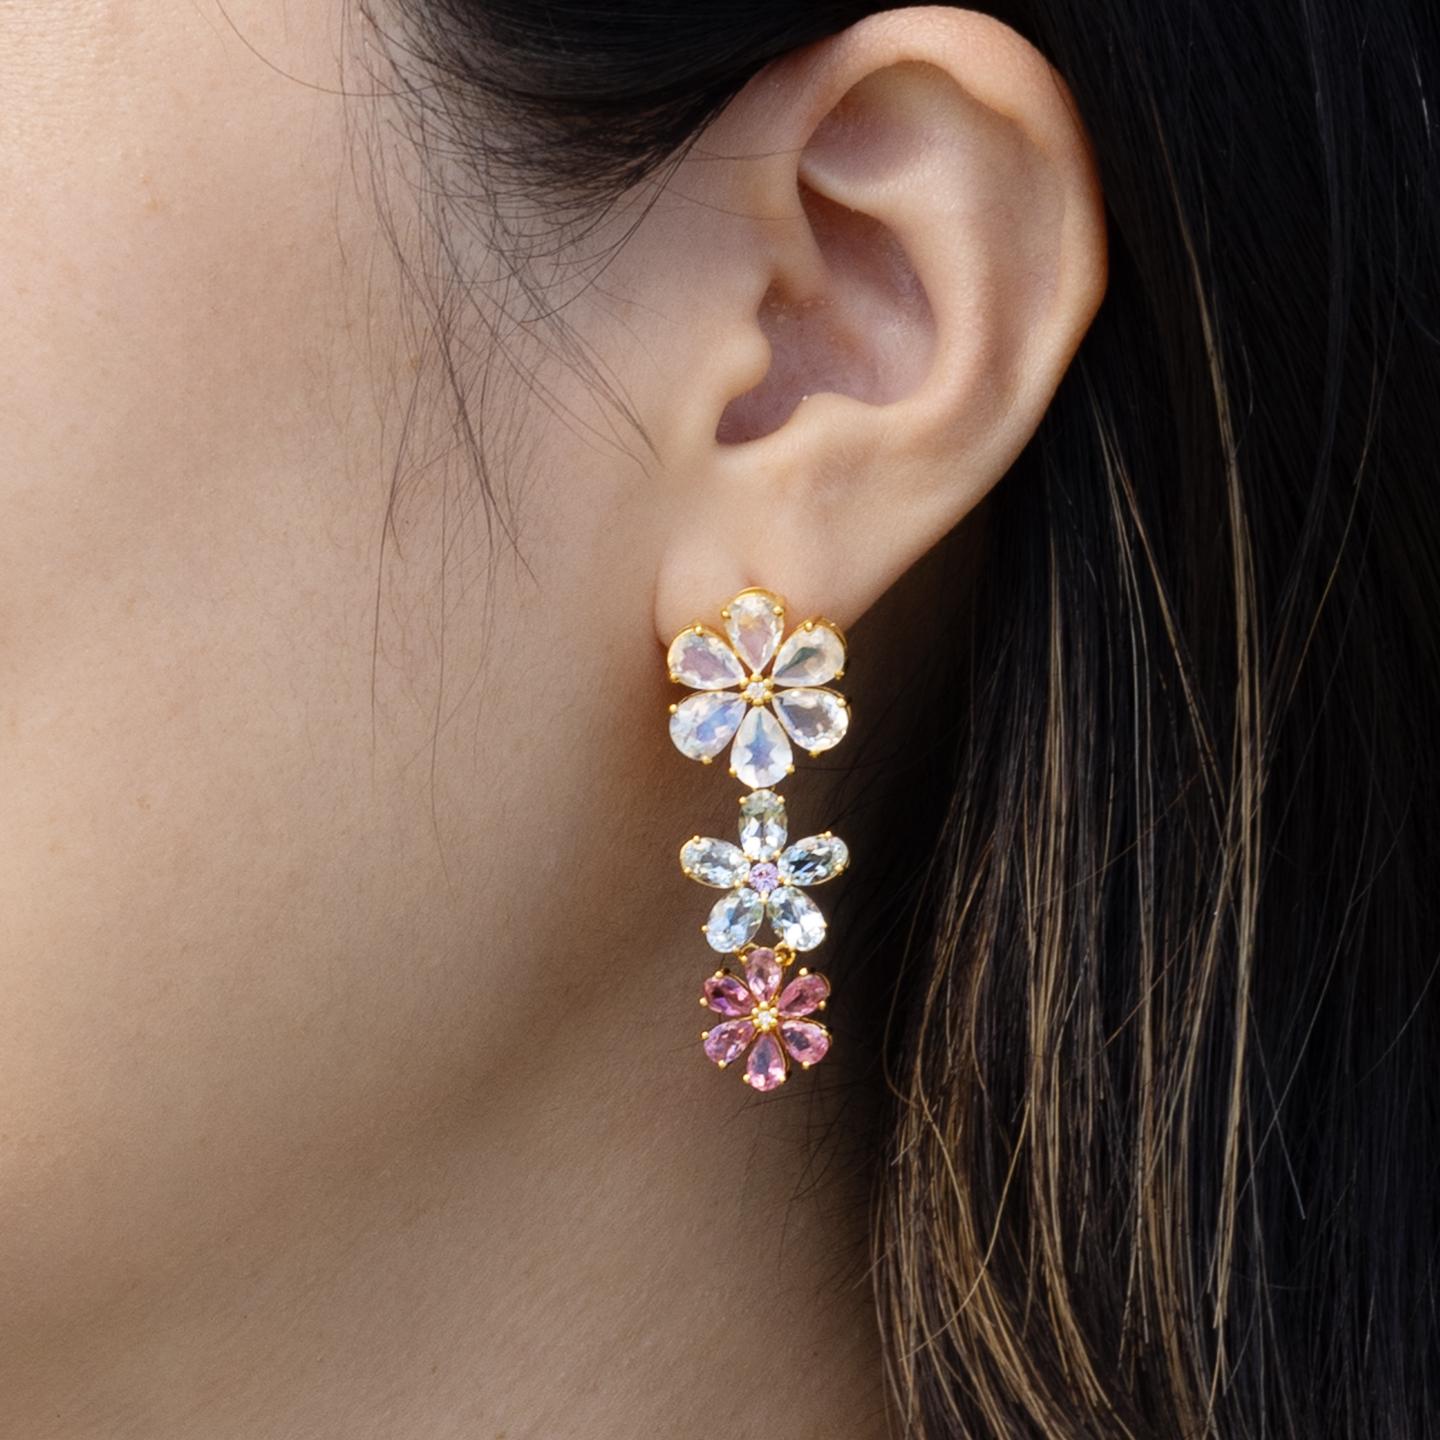 Nina Zhou's Moonstone Aquamarine Pink Sapphire Diamond Blossom Earrings, meticulously crafted in 14k yellow gold. These enchanting earrings feature alluring moonstone at the top, renowned for its captivating sheen and the subtle play of light